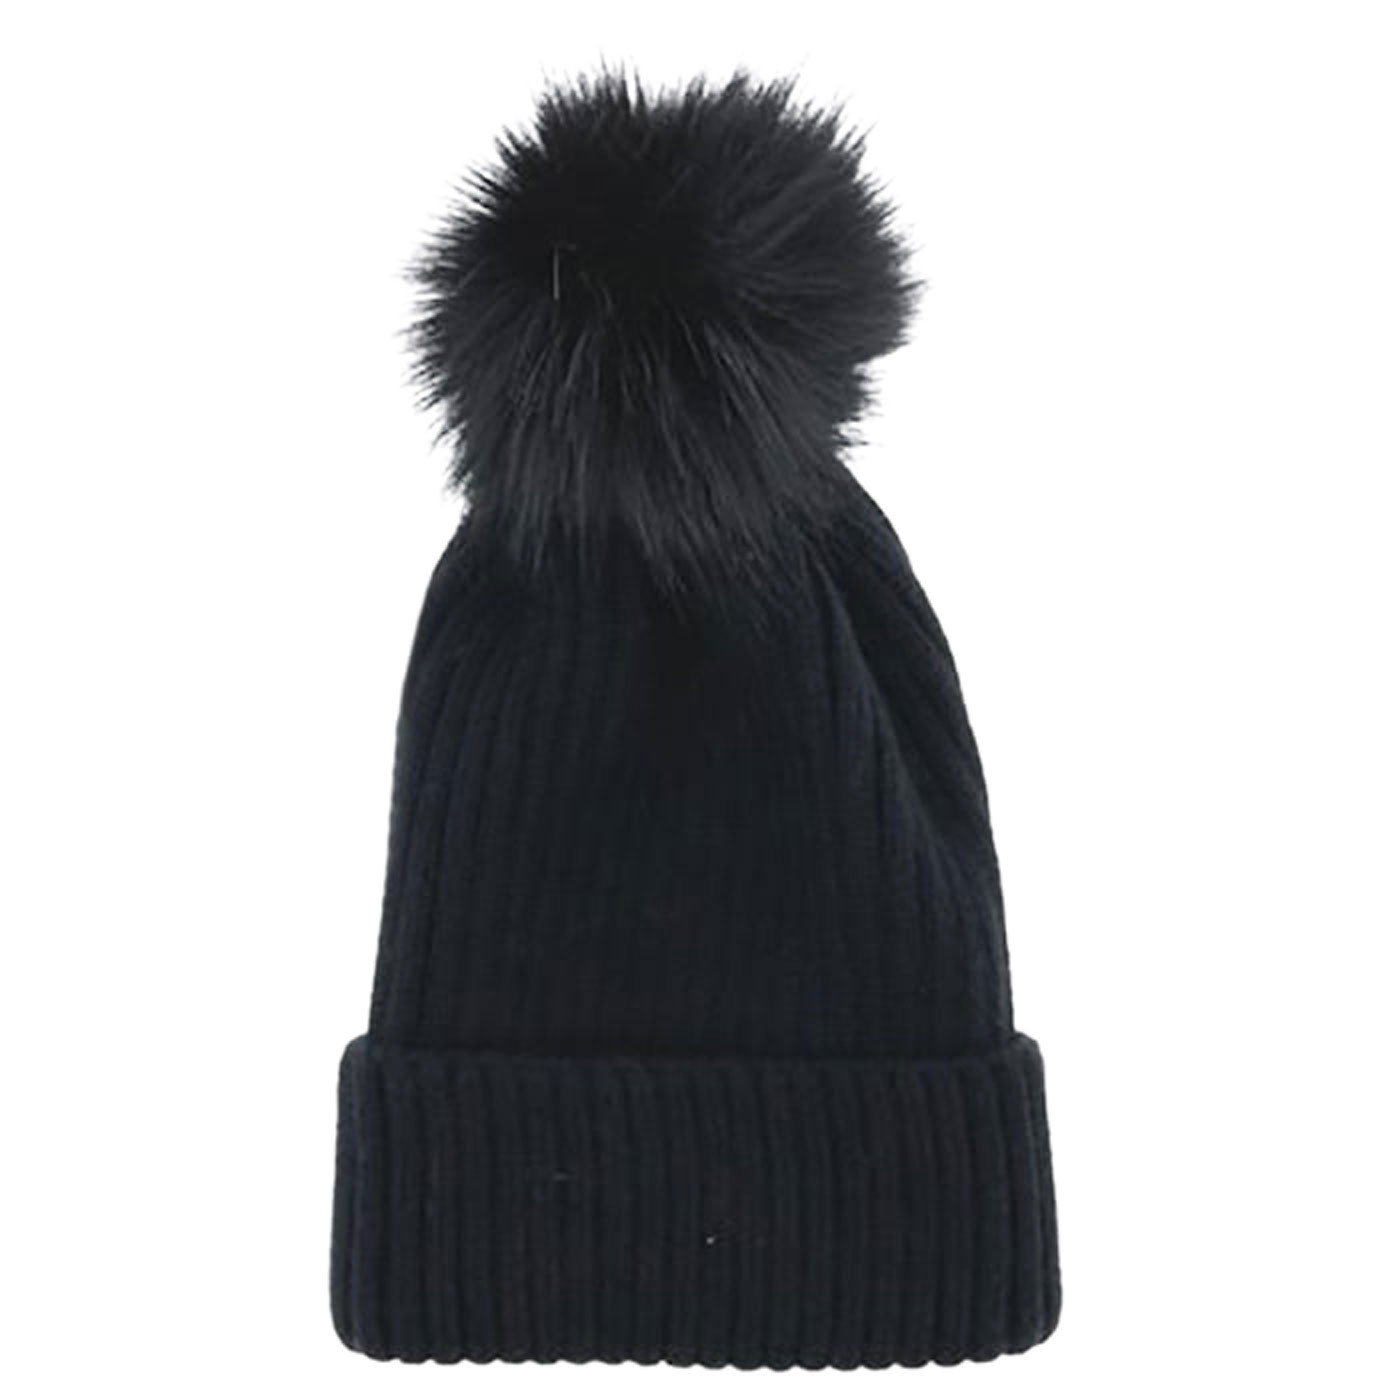 Black Soft Knit Faux Pom Pom Beanie Hat. From daily life to holidays, this super stylish beanie hat's cozy fabric will keep you looking great and feeling warm. It's elegant, comfortable, and fashionable. Perfect for casual, trips, holidays, sports, skiing, skating, hiking, etc. or simply just for cold weather. 